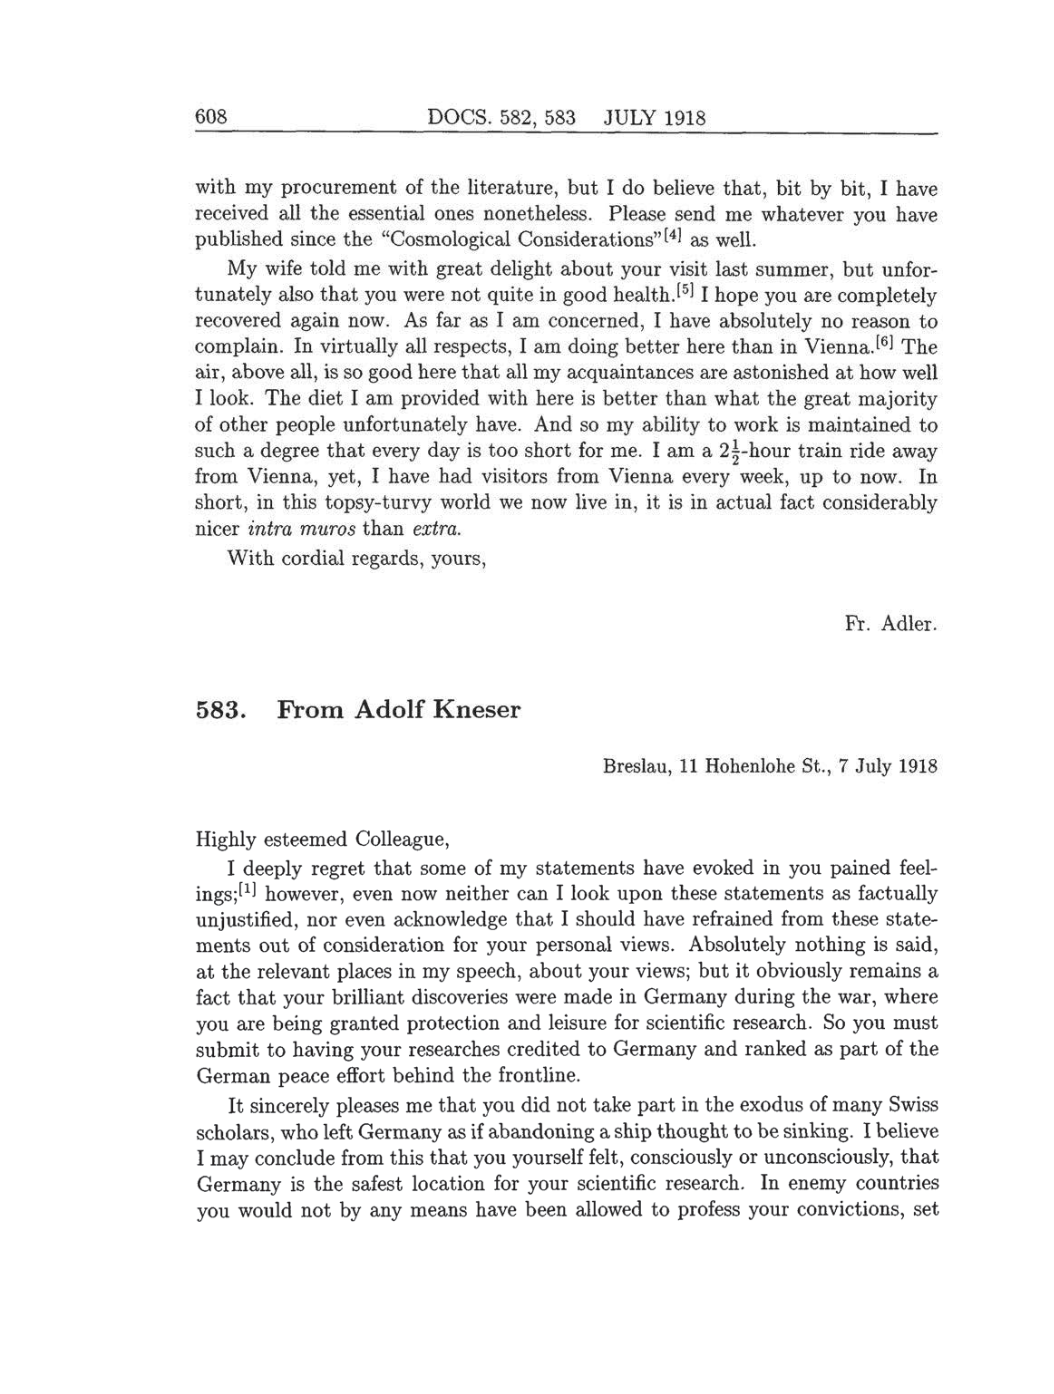 Volume 8: The Berlin Years: Correspondence, 1914-1918 (English translation supplement) page 608